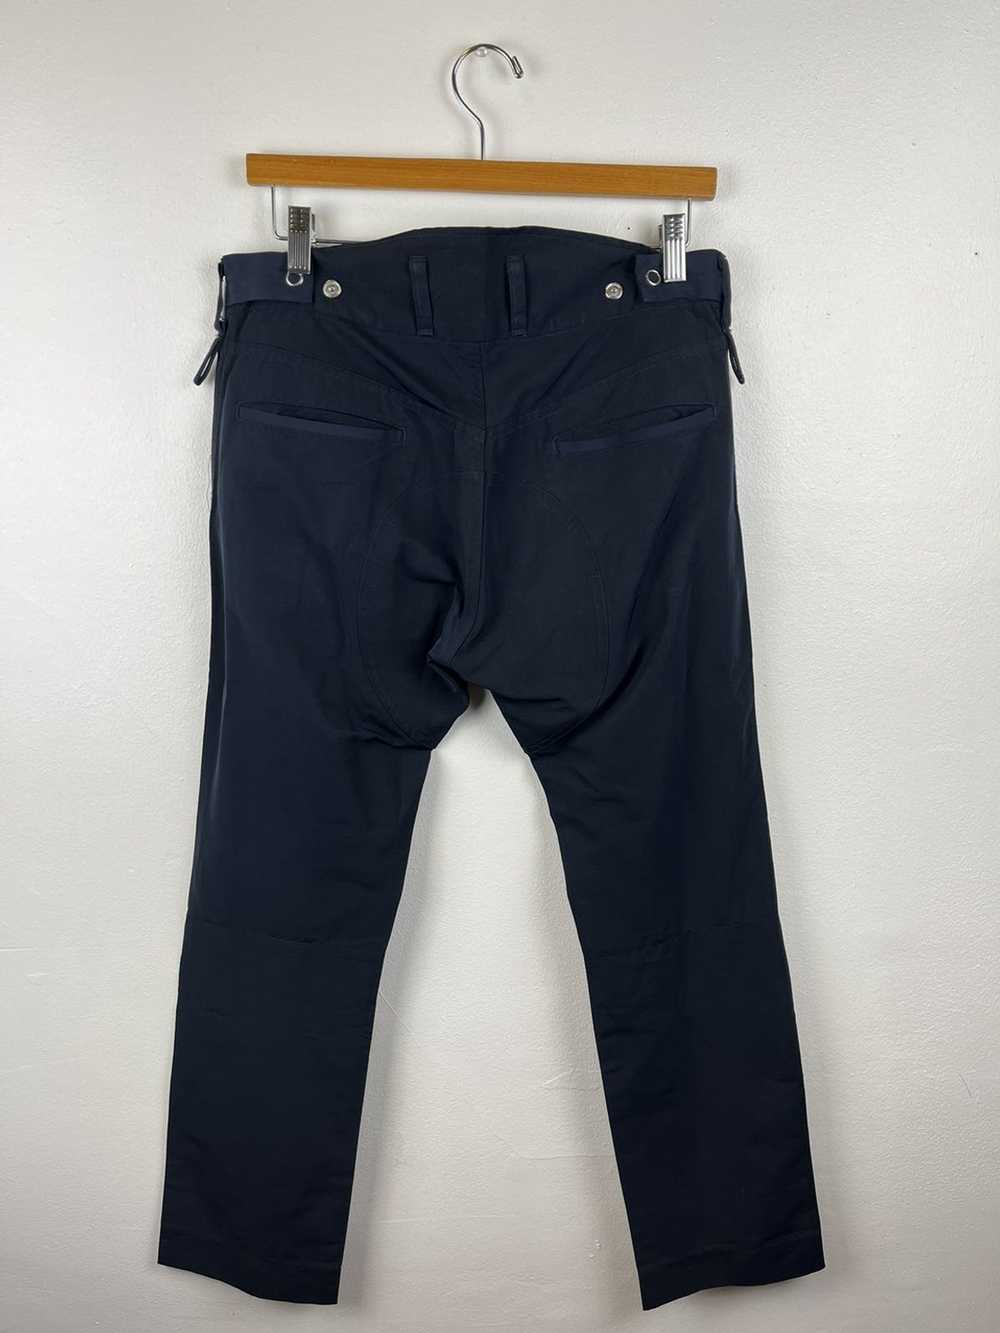 Undercover Undercover Pants - image 4